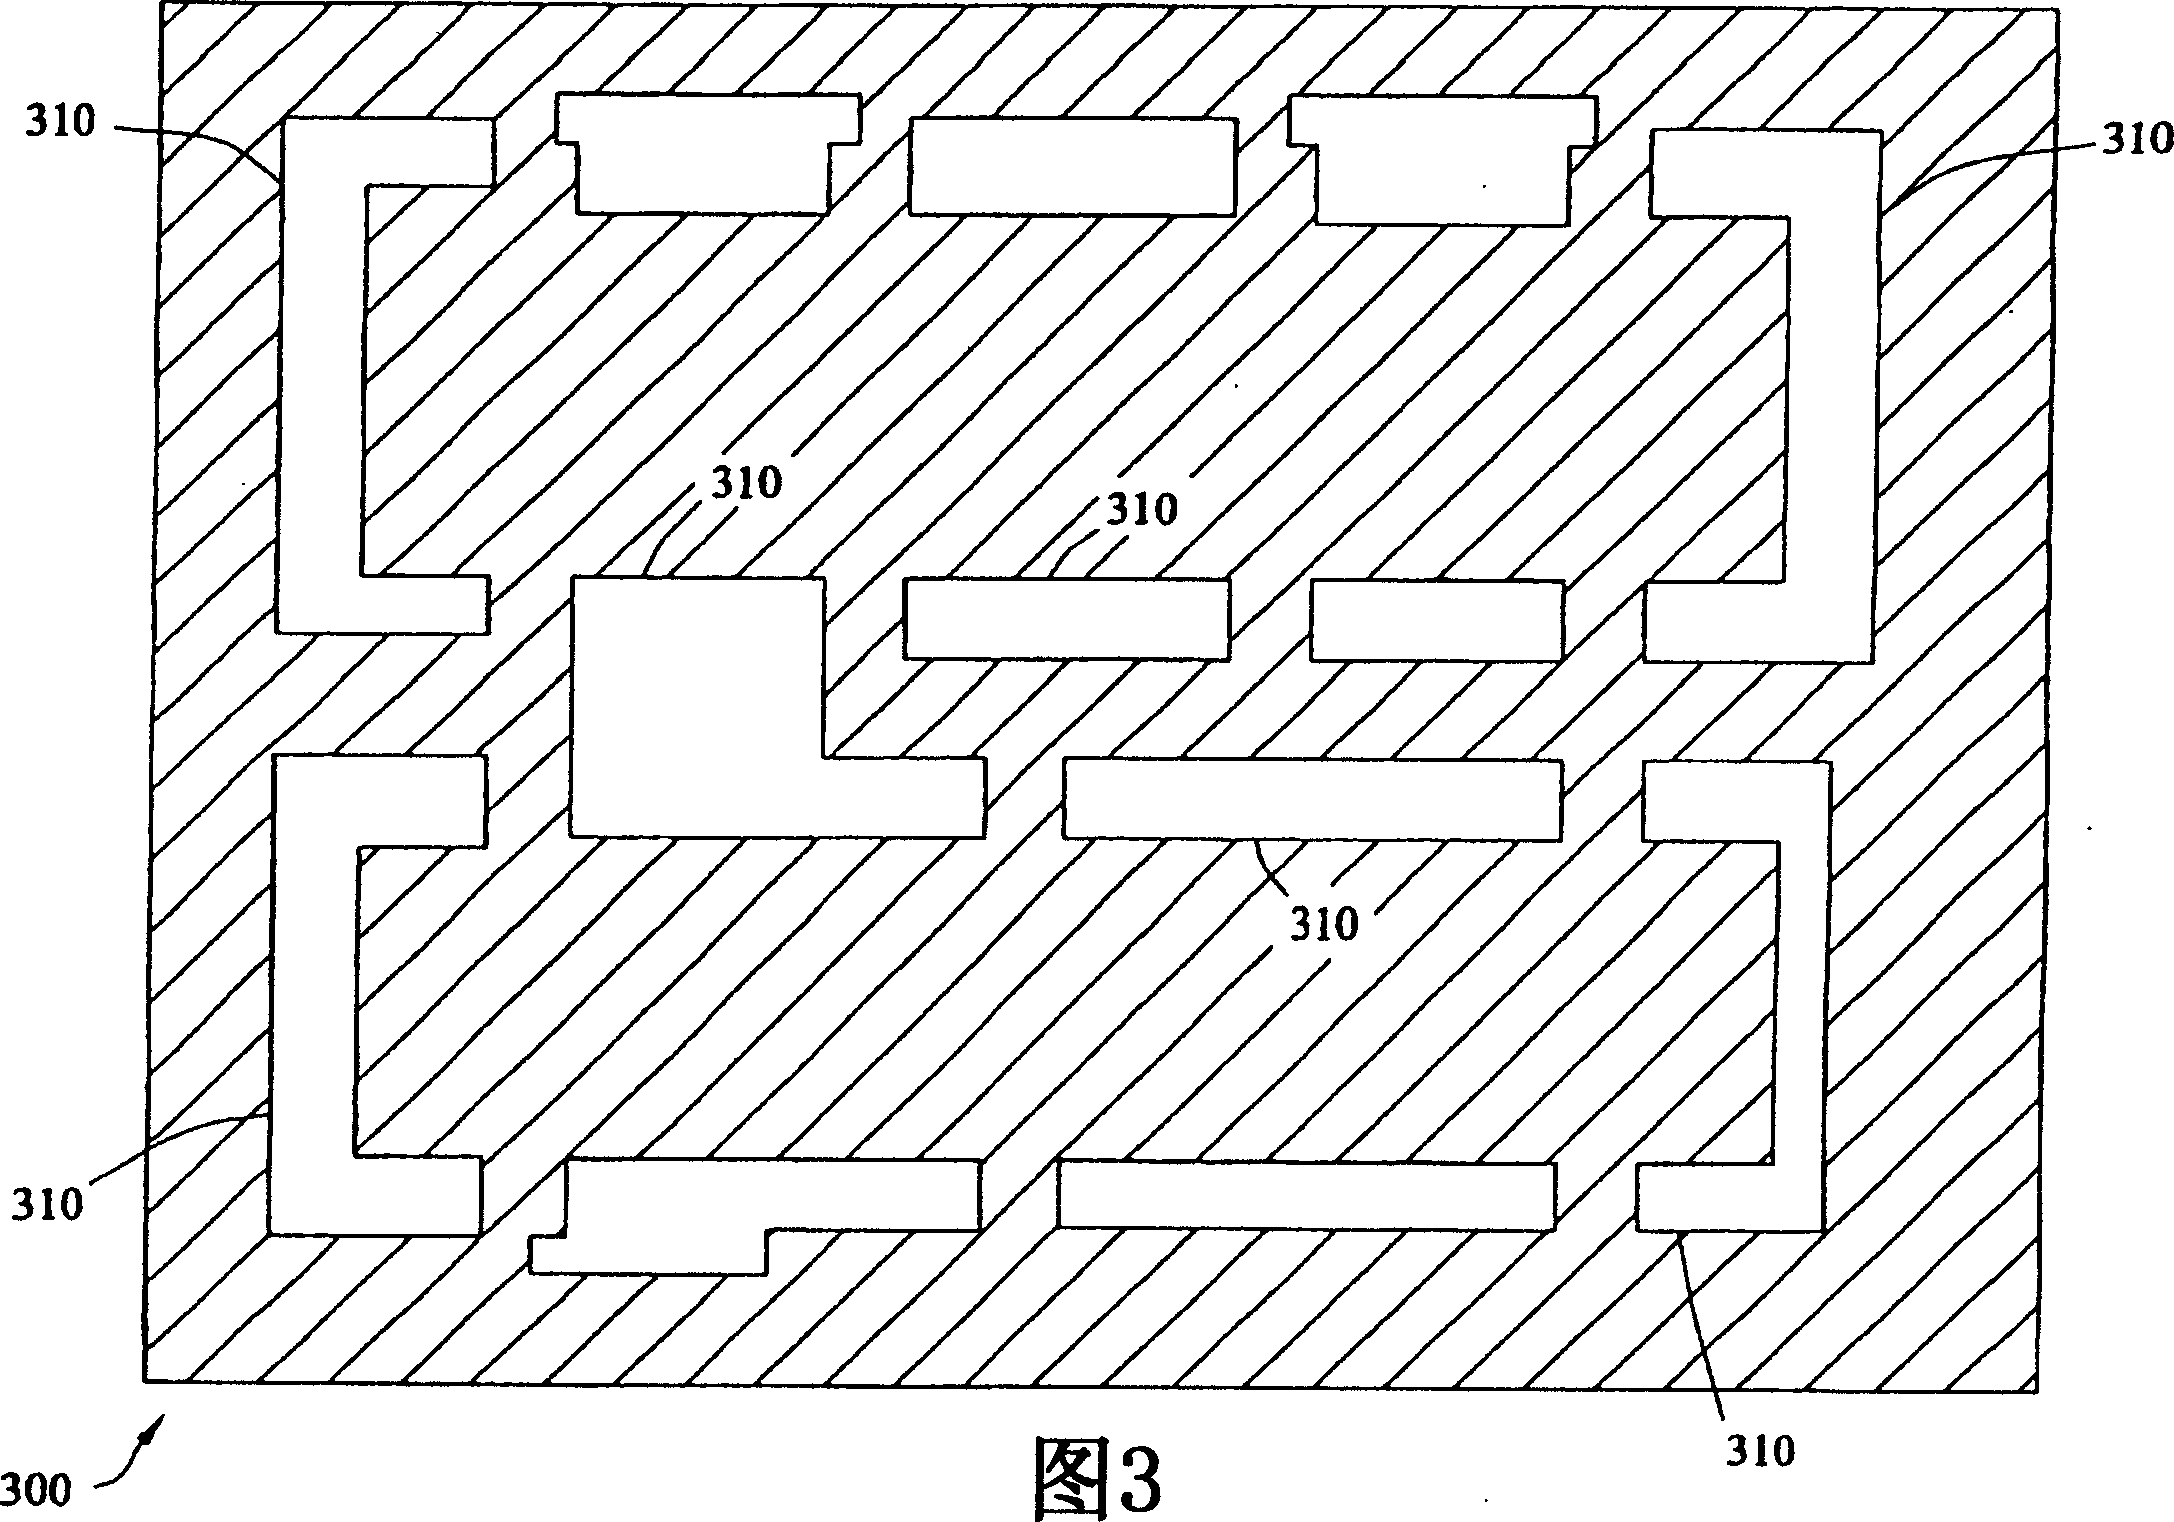 Method of enhancing clear field phase shift masks with border regions around phase 0 and phase 180 regions